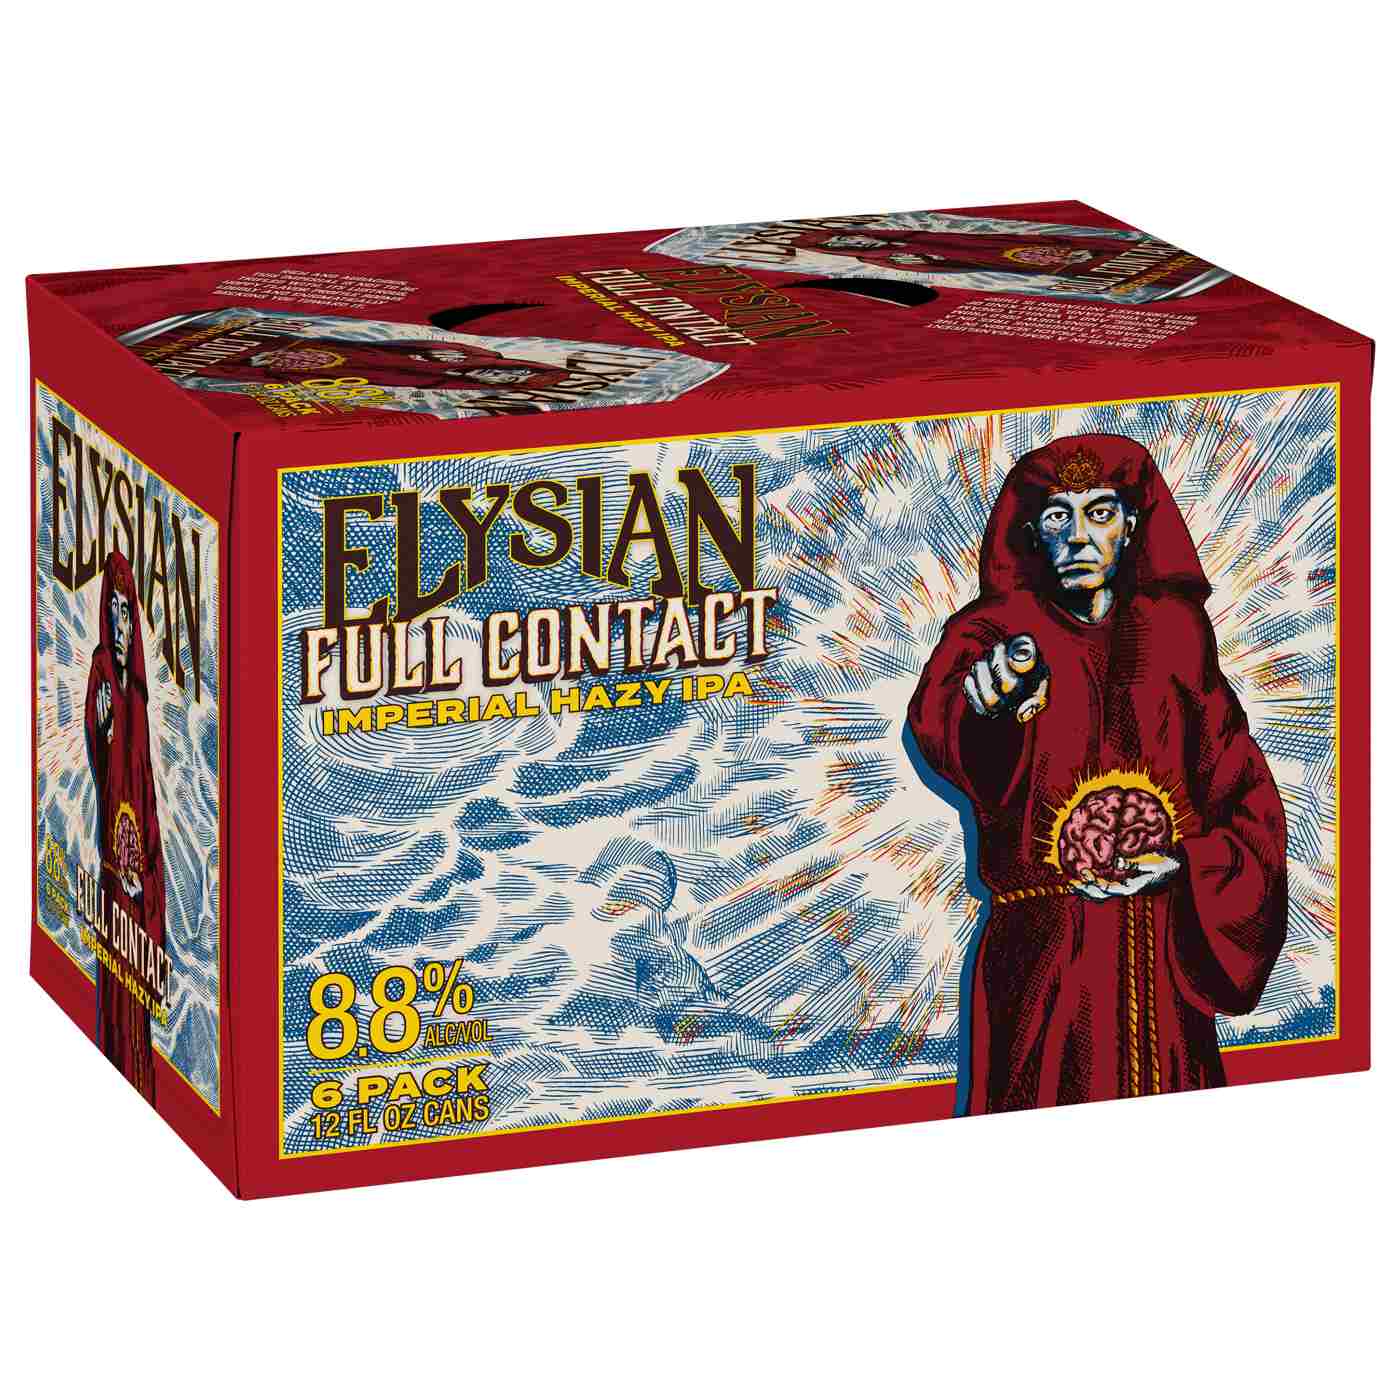 Elysian Full Contact Imperial Hazy IPA Beer 12 oz Cans; image 1 of 2